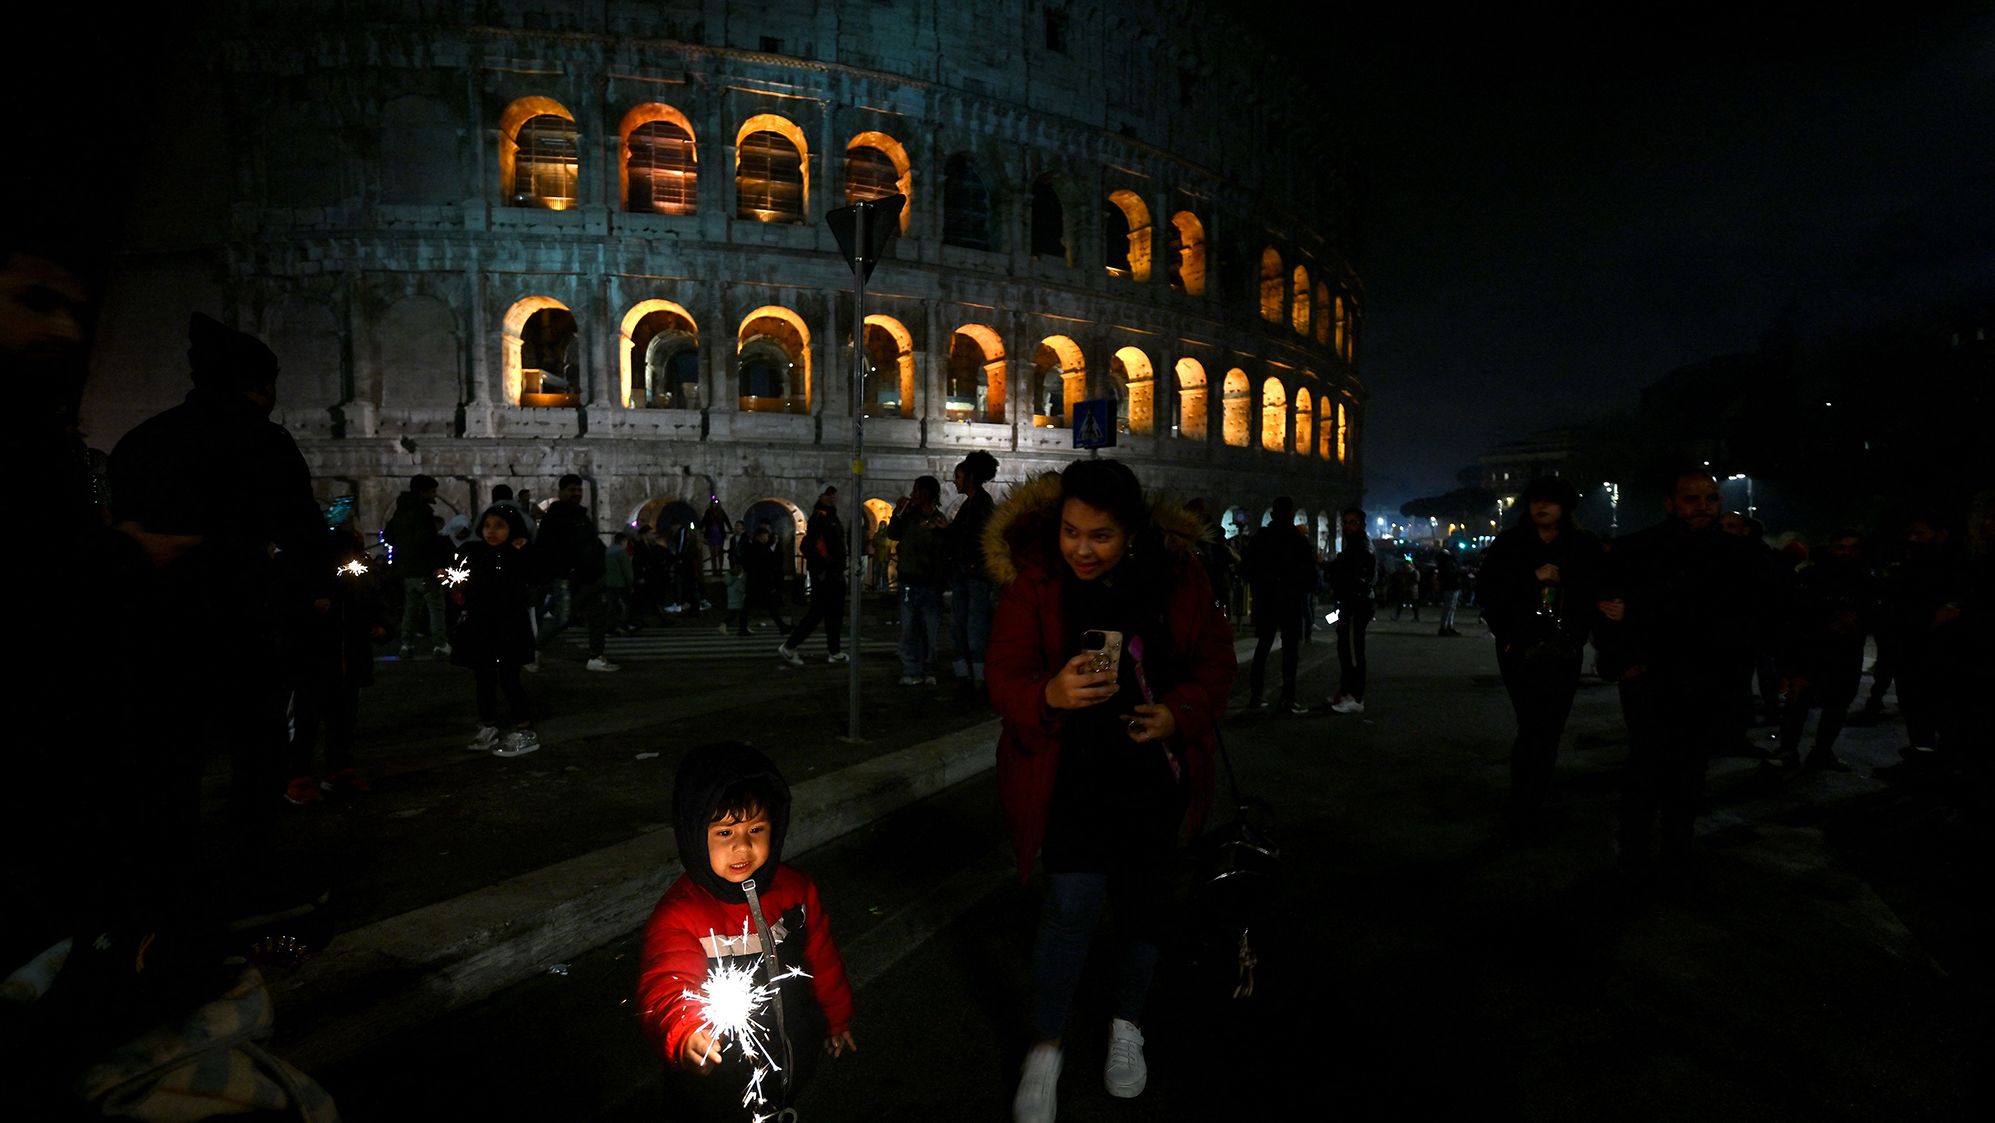 A child celebrates the new year in front of the Colosseum in Rome.